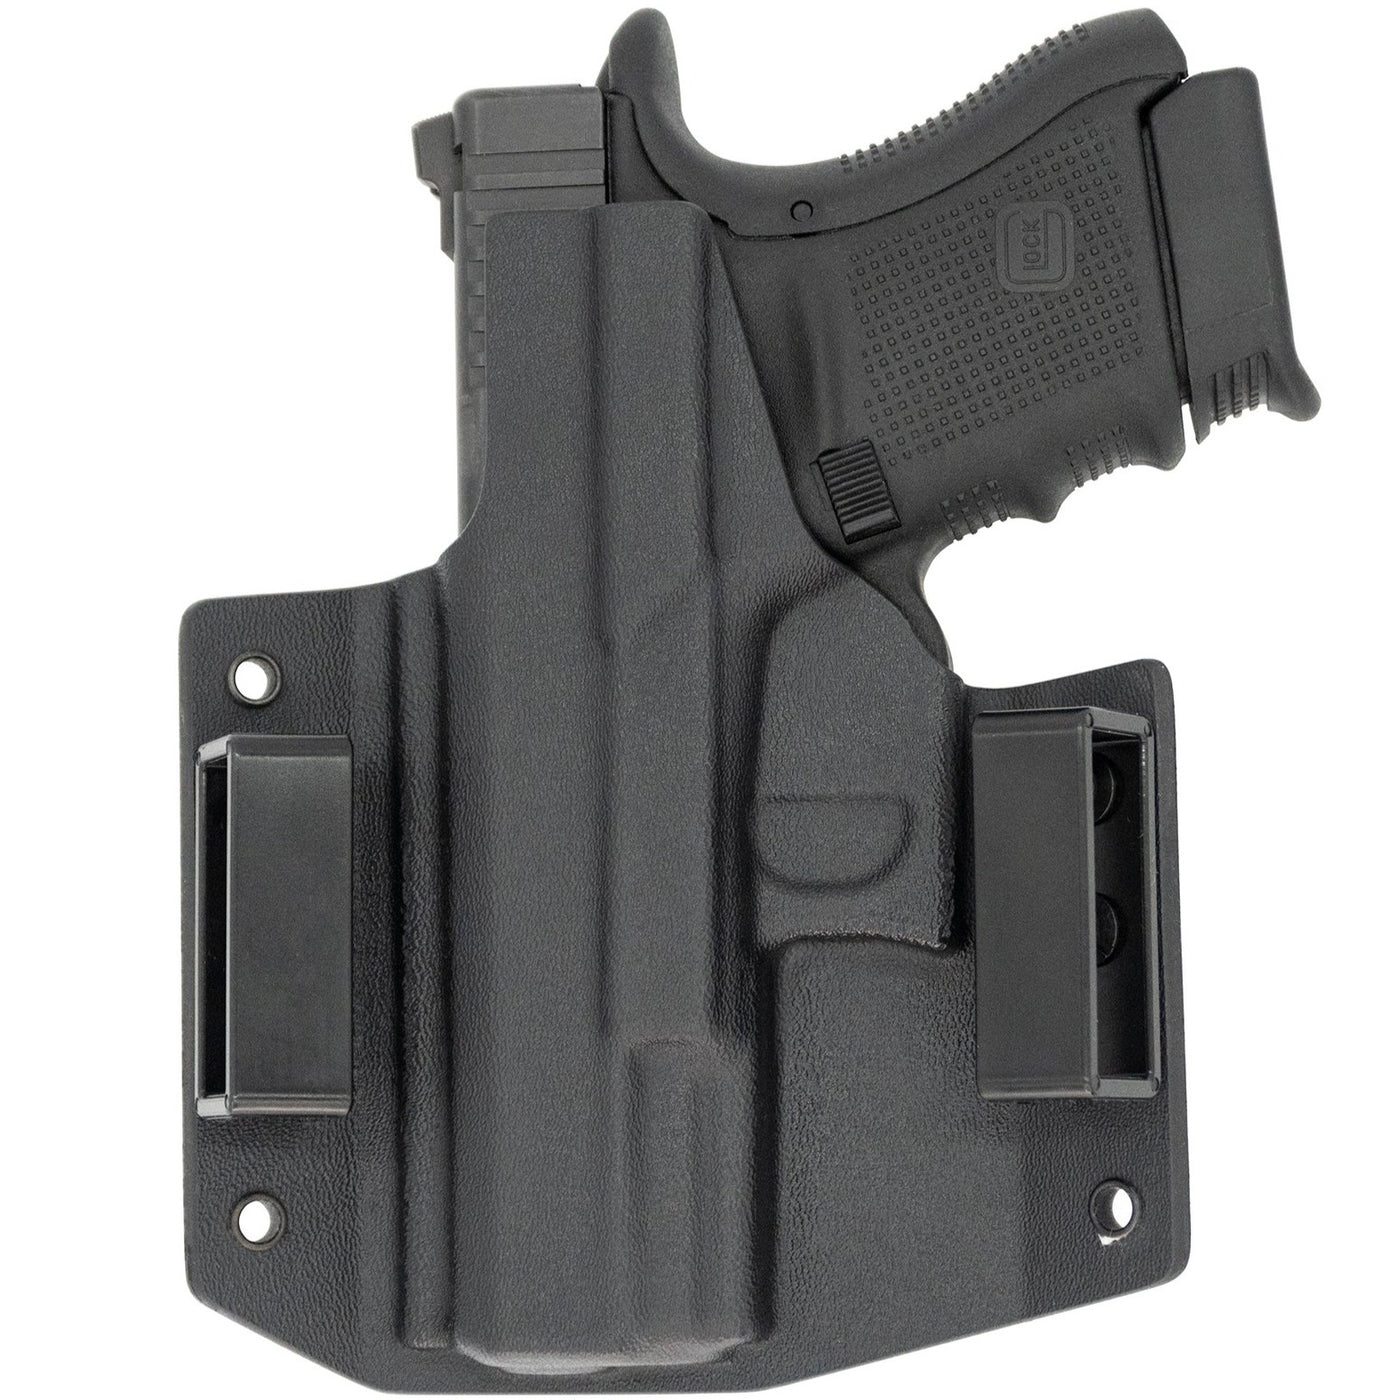 This is the C&G Holsters Covert series outside the waistband holster for the Glock 29, Glock 30 and Glock 30s in right hand black in color and a rear view of the gun. 